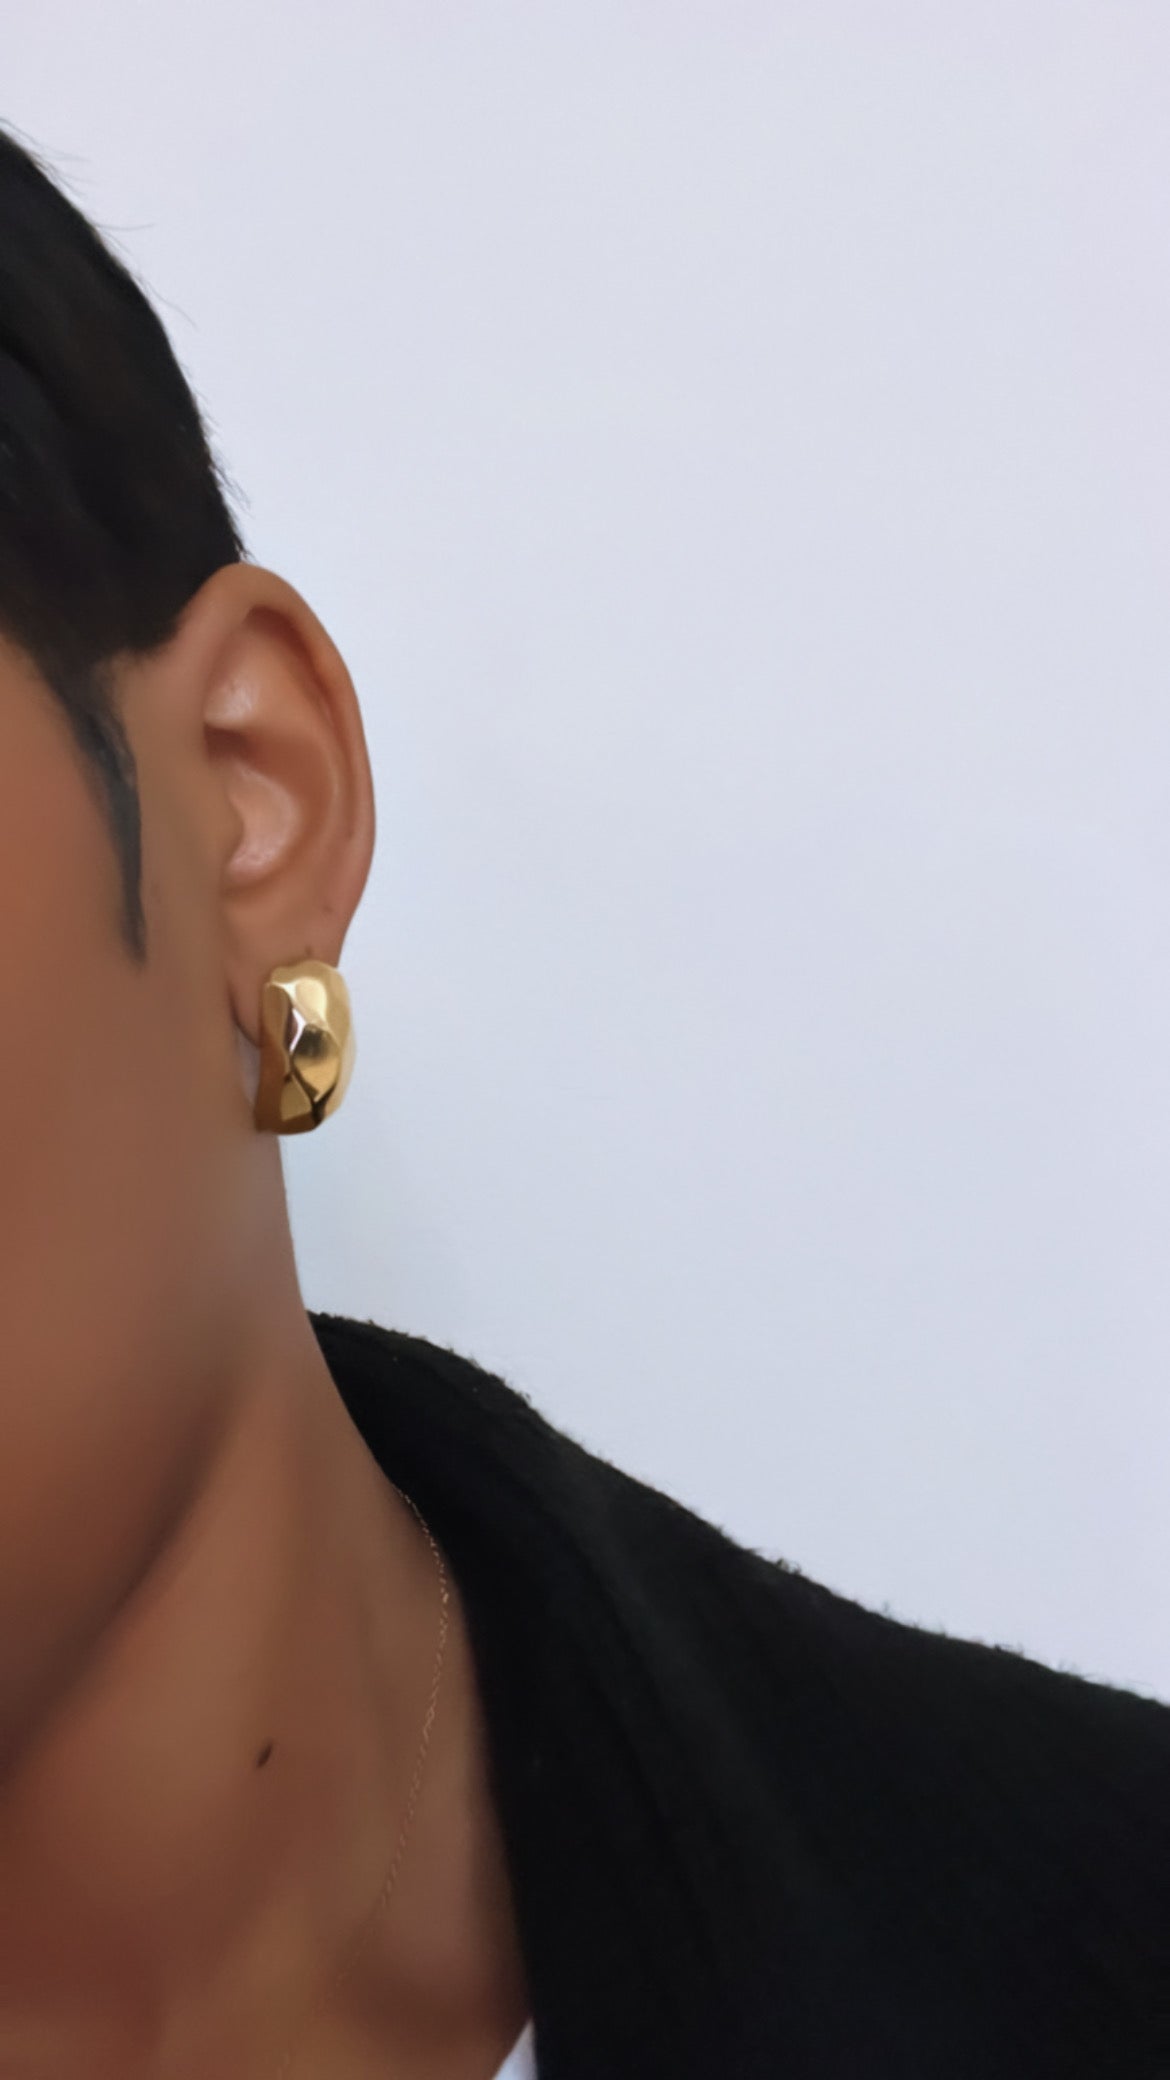 Do Earrings Look Good On Most Guys? - Wooden Earth